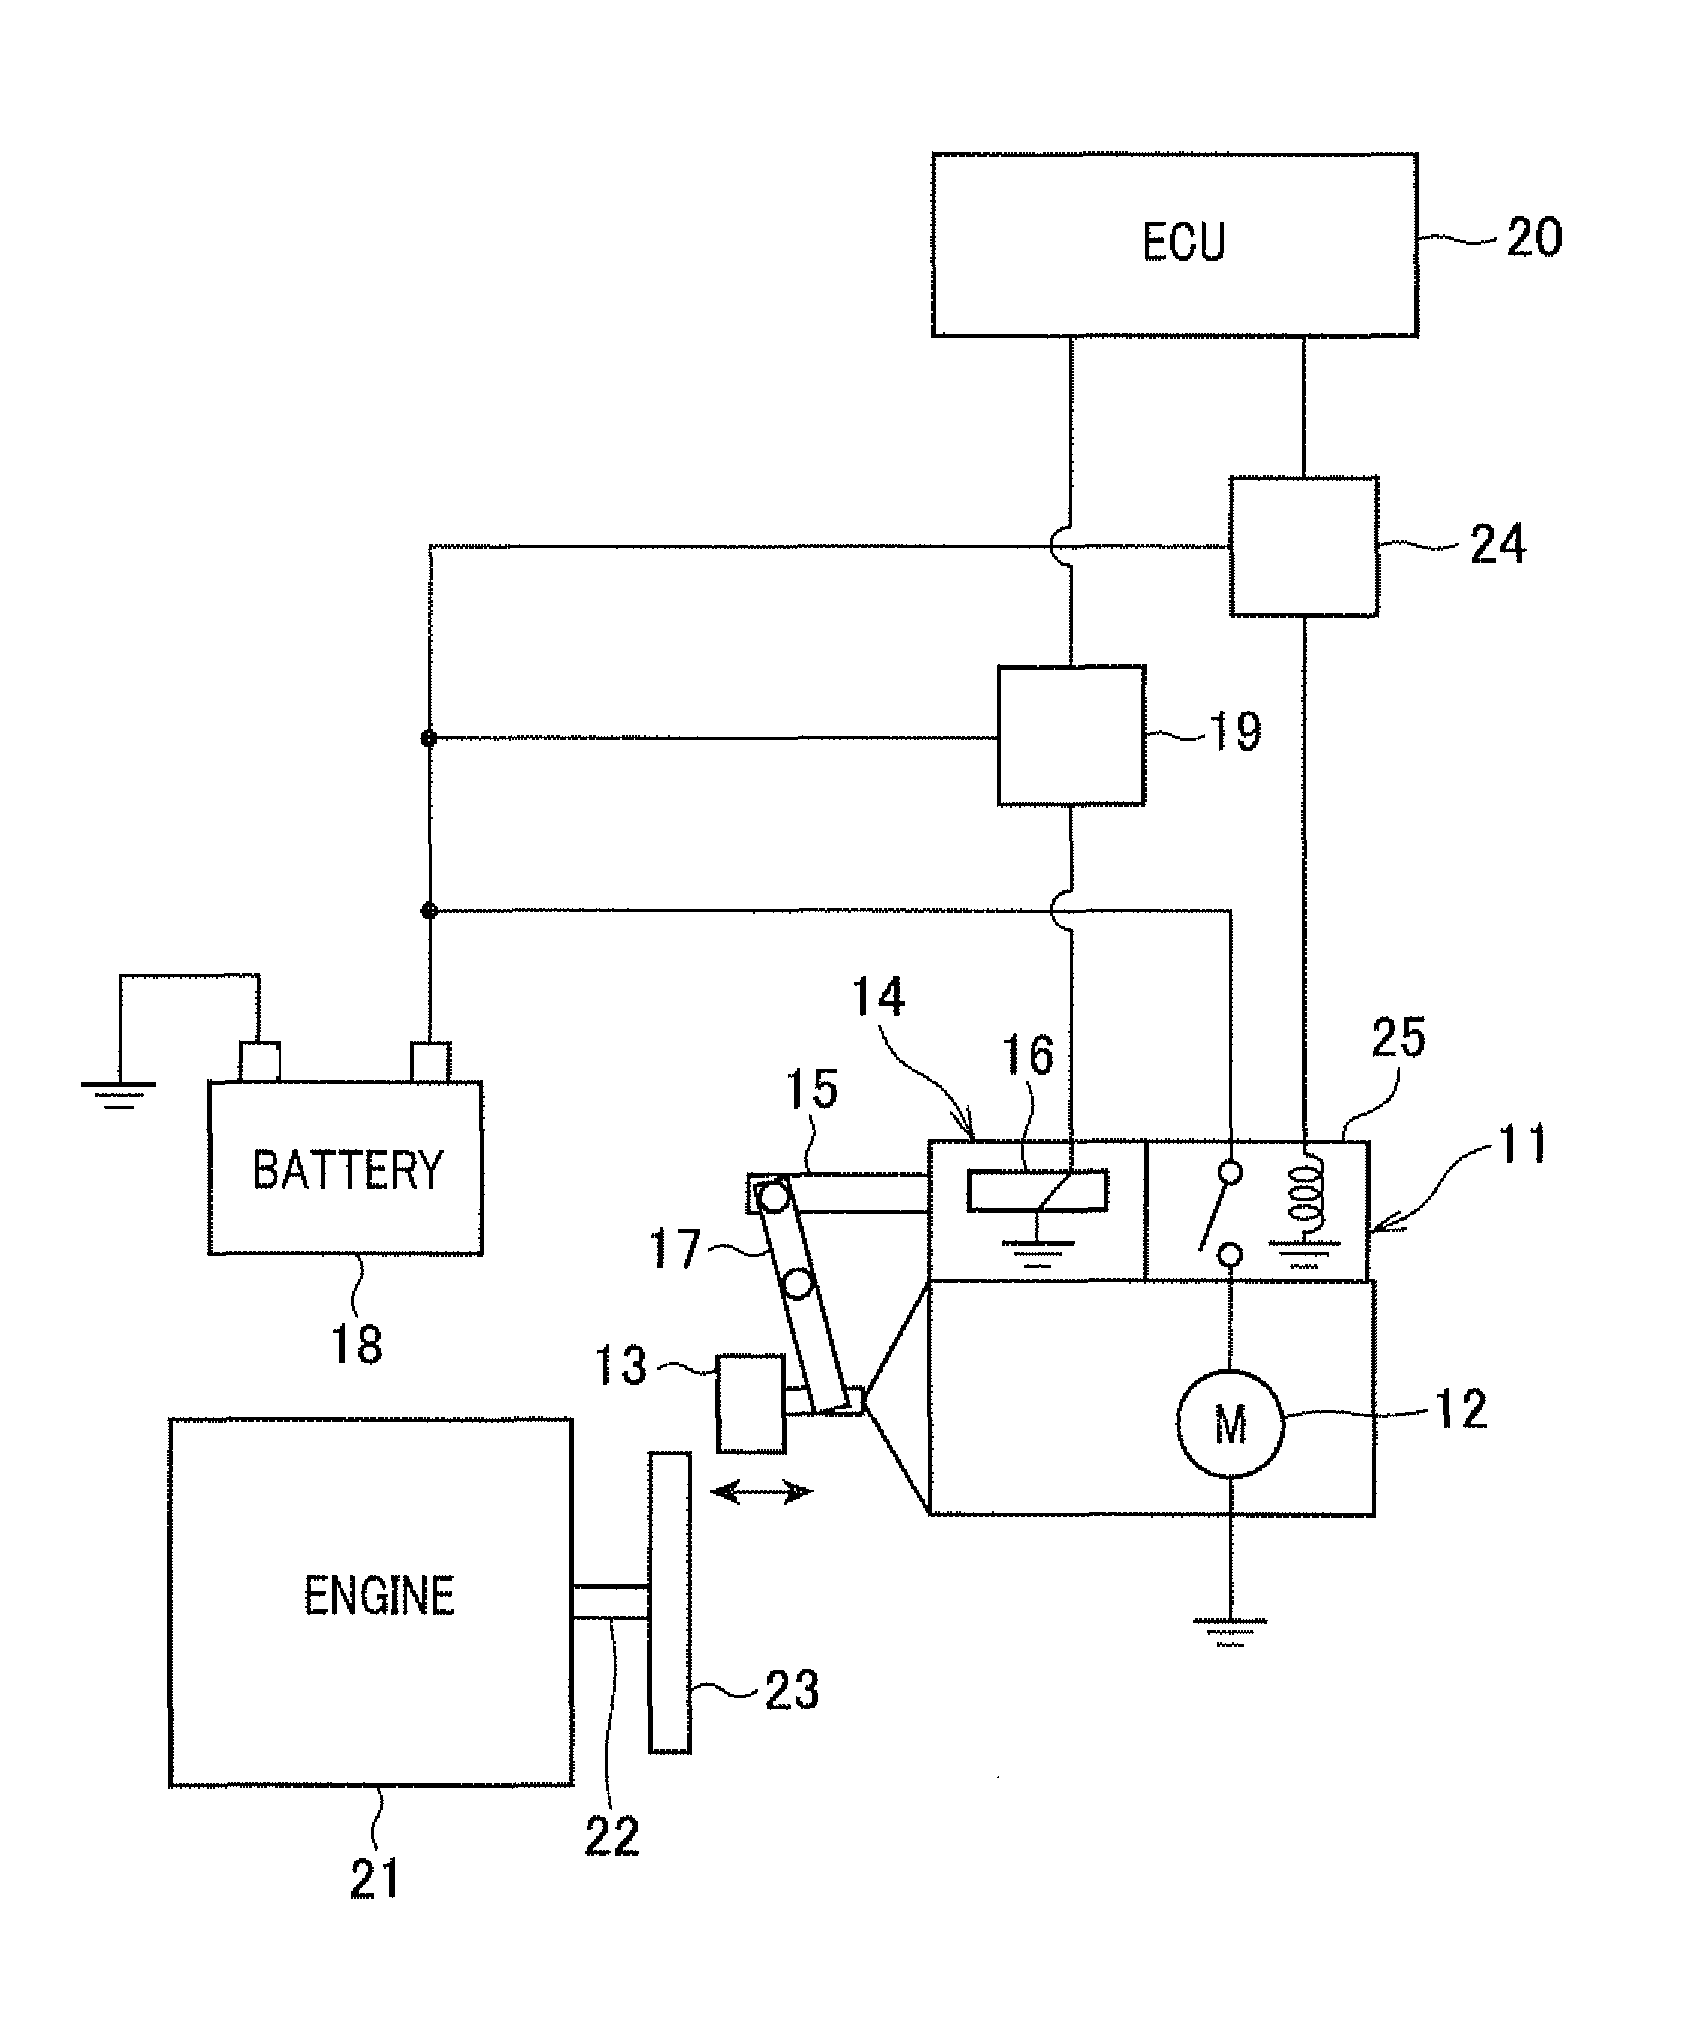 Control device of automatic engine stop and start